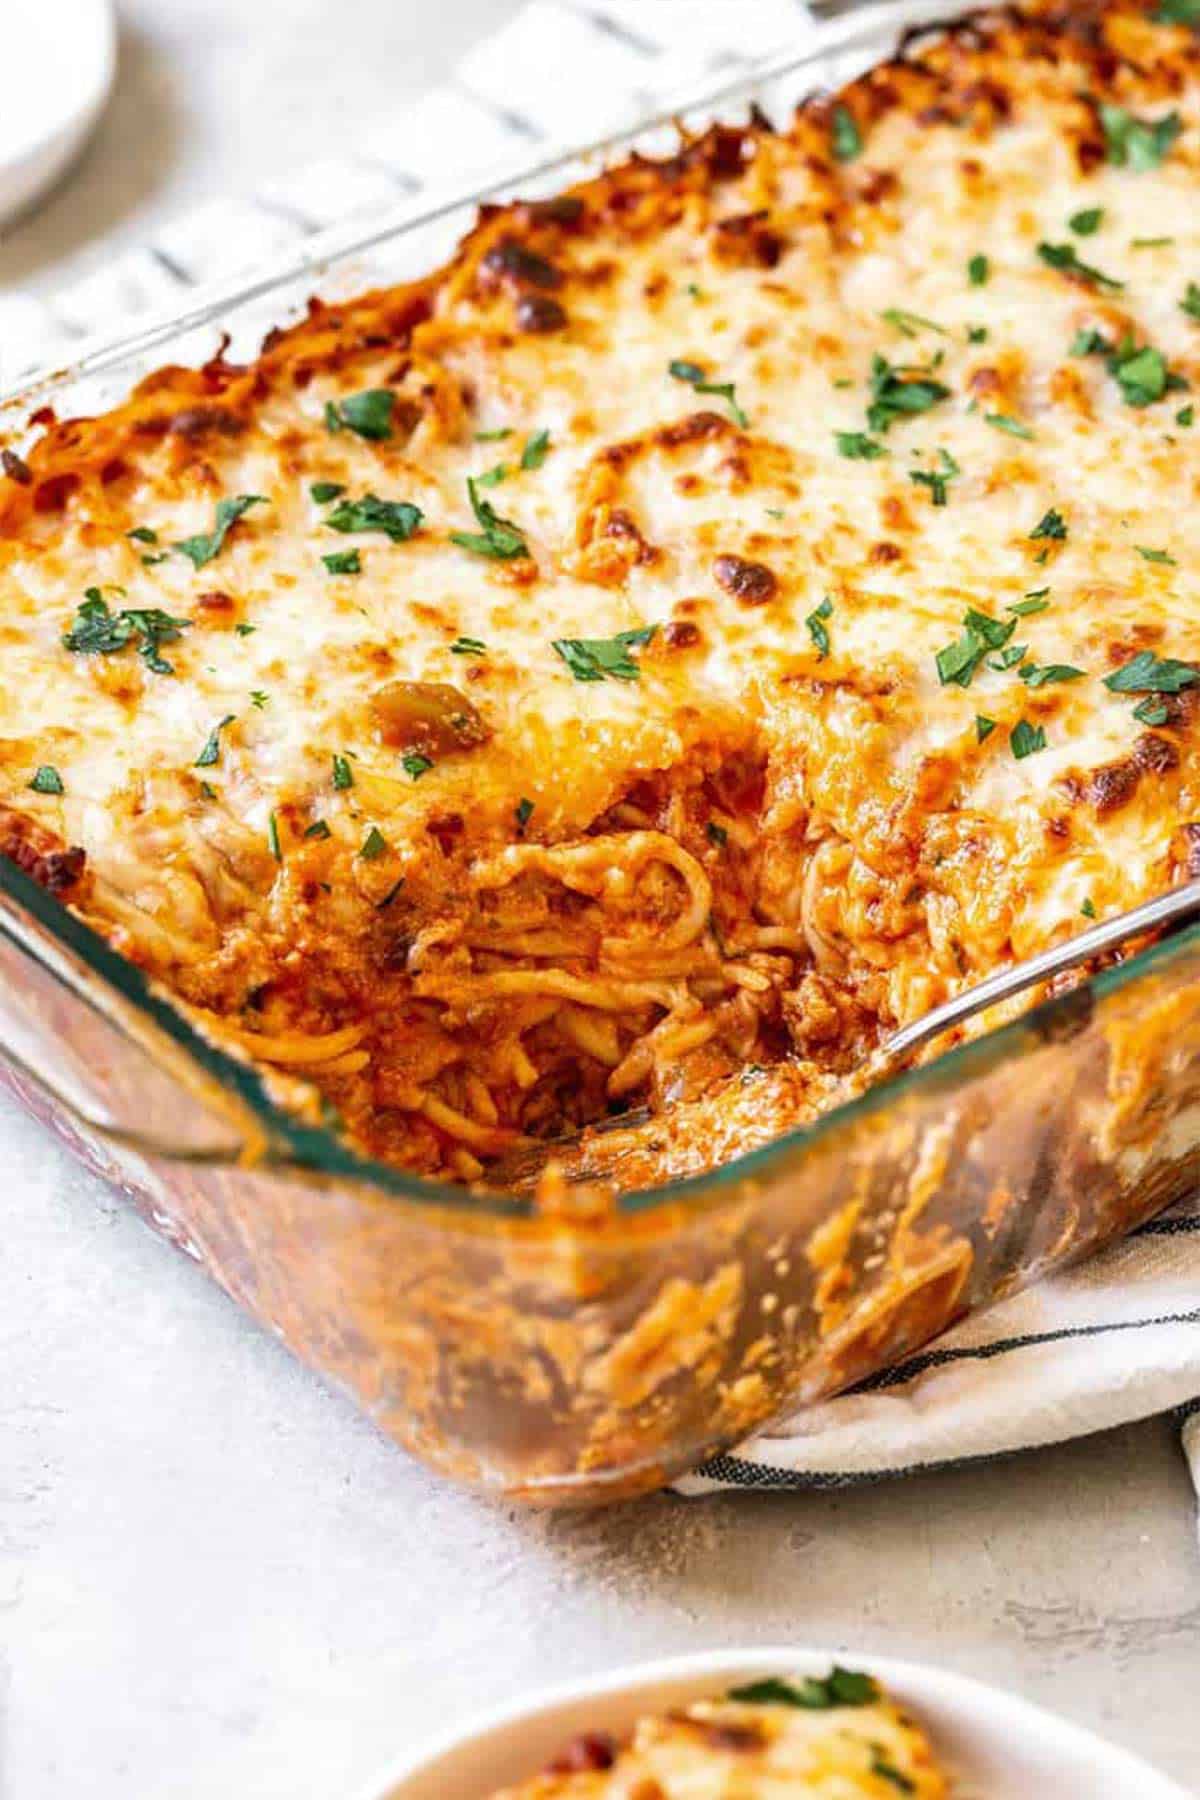 Baked spaghetti with cream cheese dug into and added to a plate